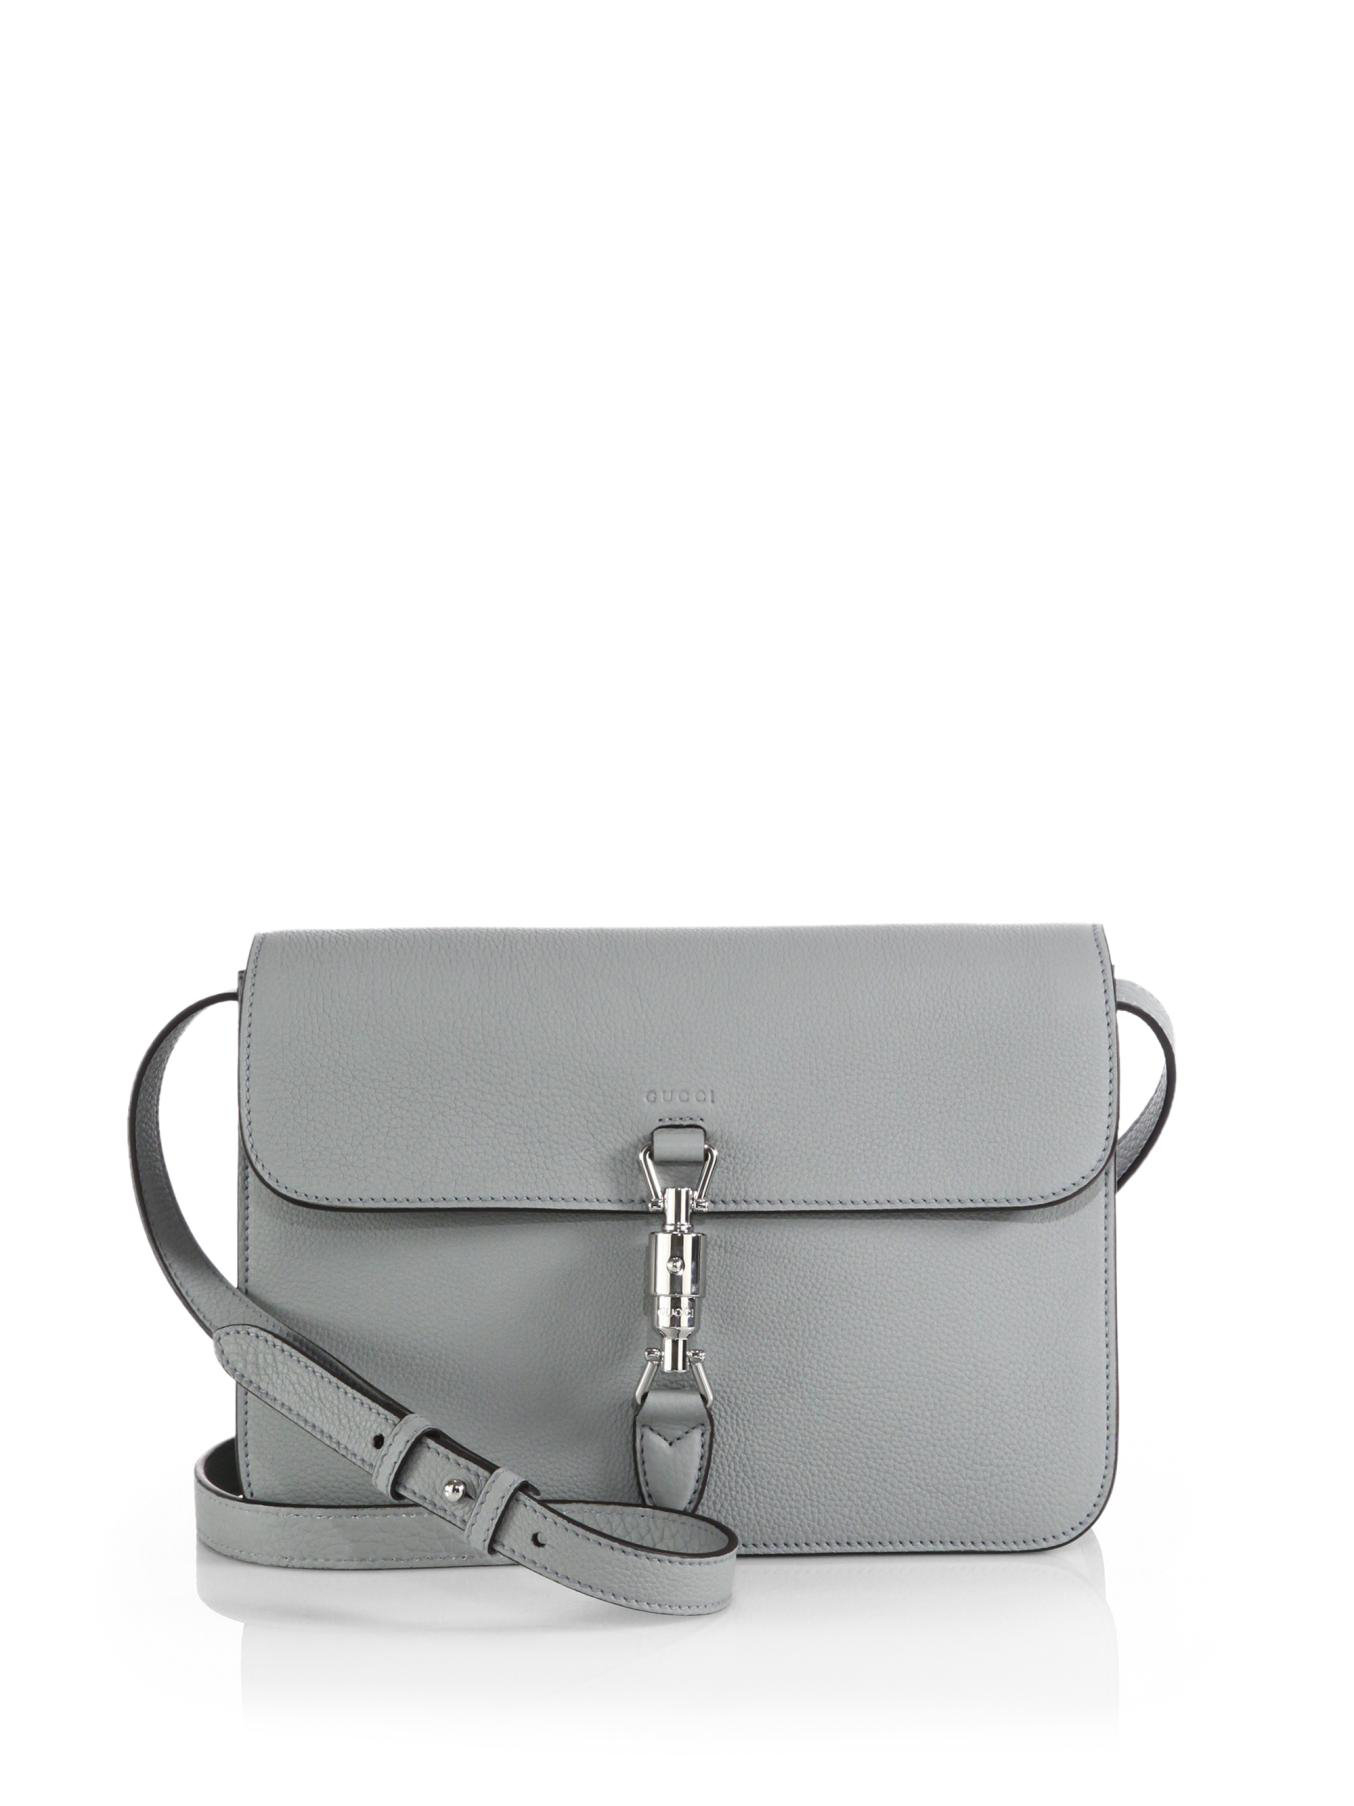 Gucci Jackie Soft Leather Flap Shoulder Bag in Grey (Gray) - Lyst